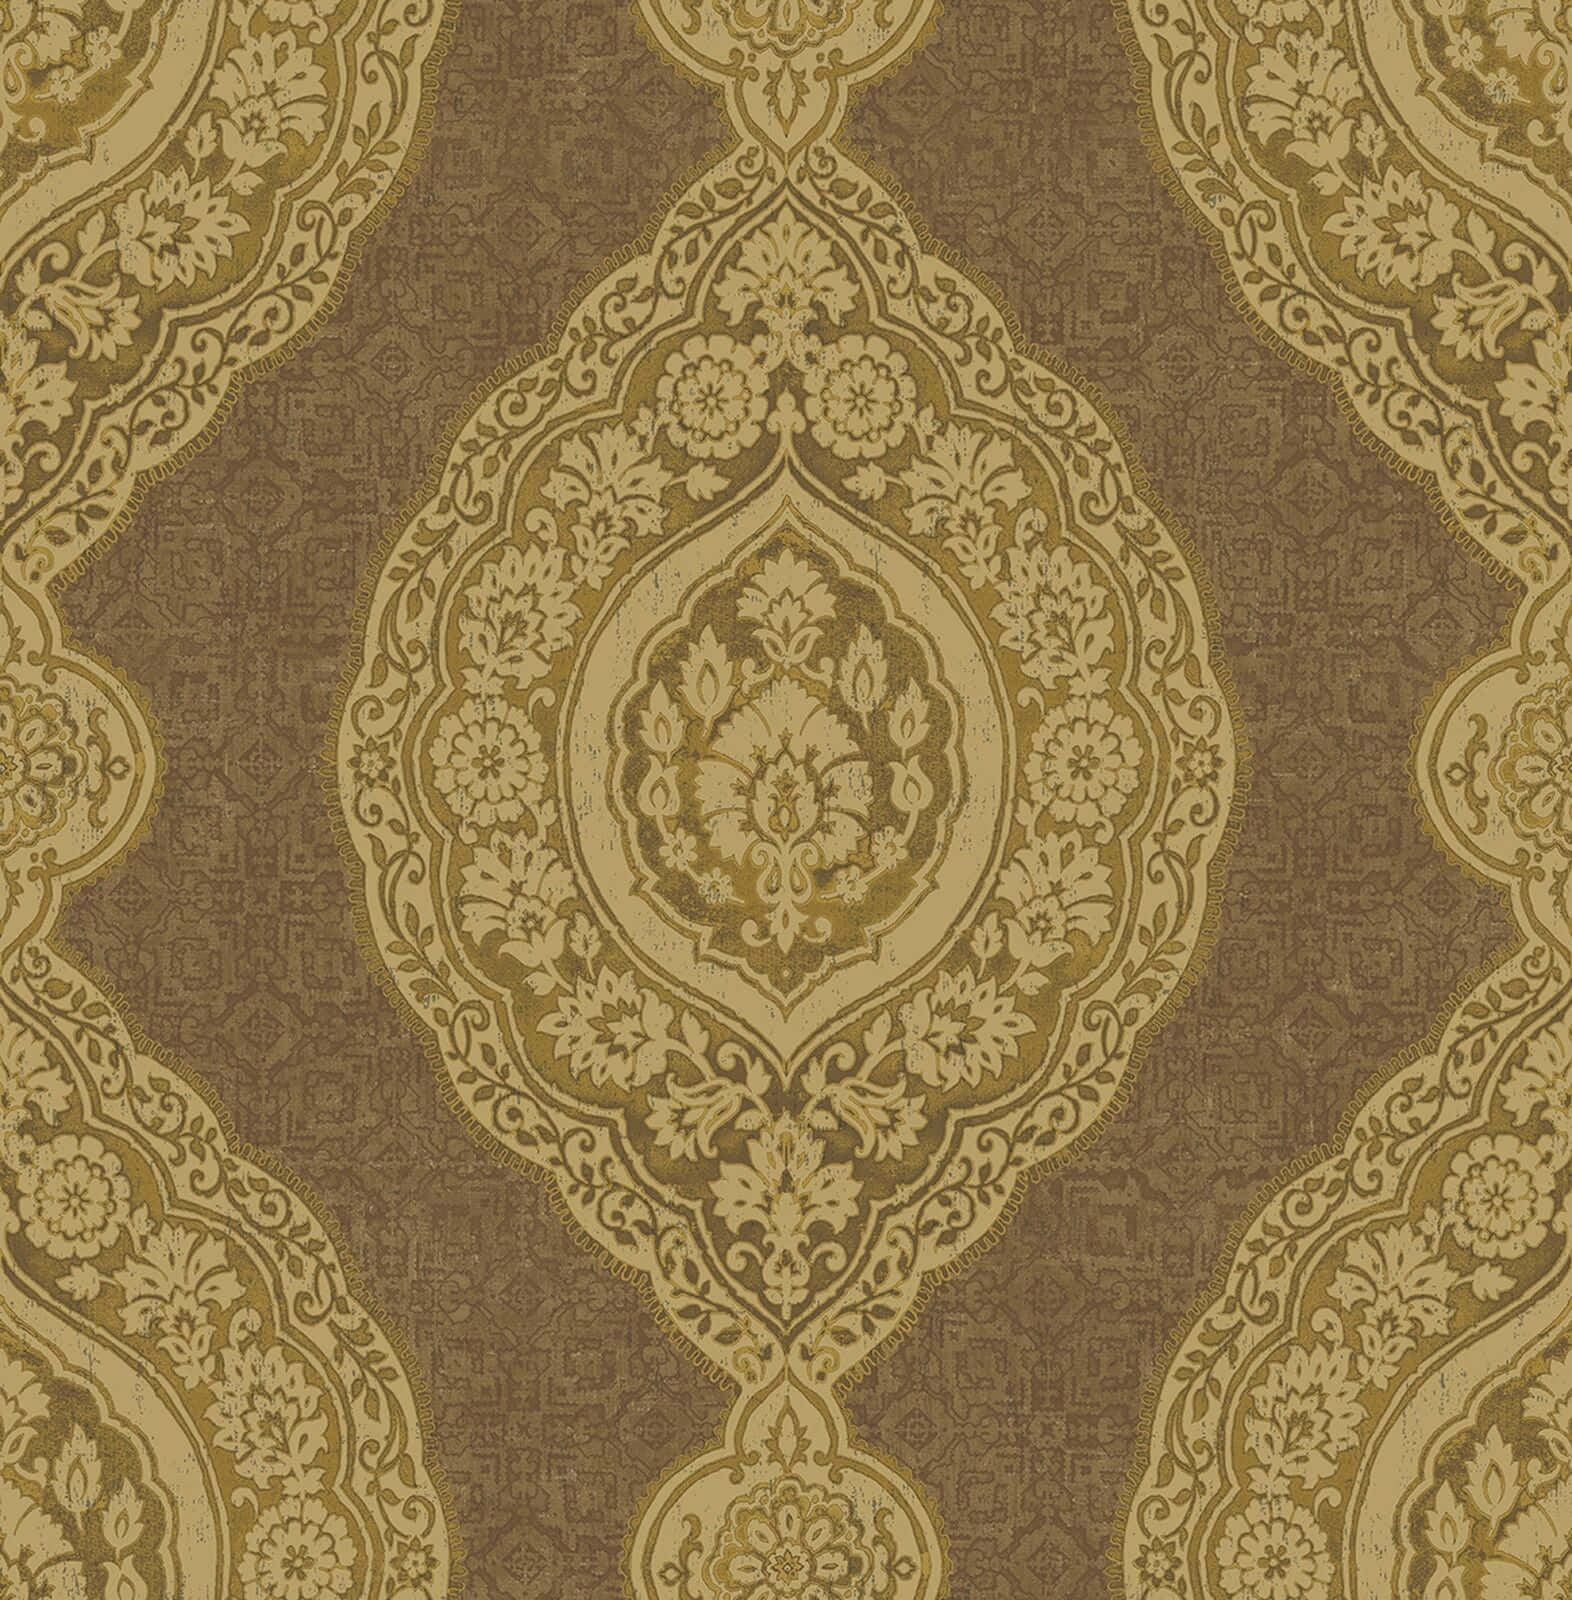 Gilded Details That Is So Classy Wallpaper